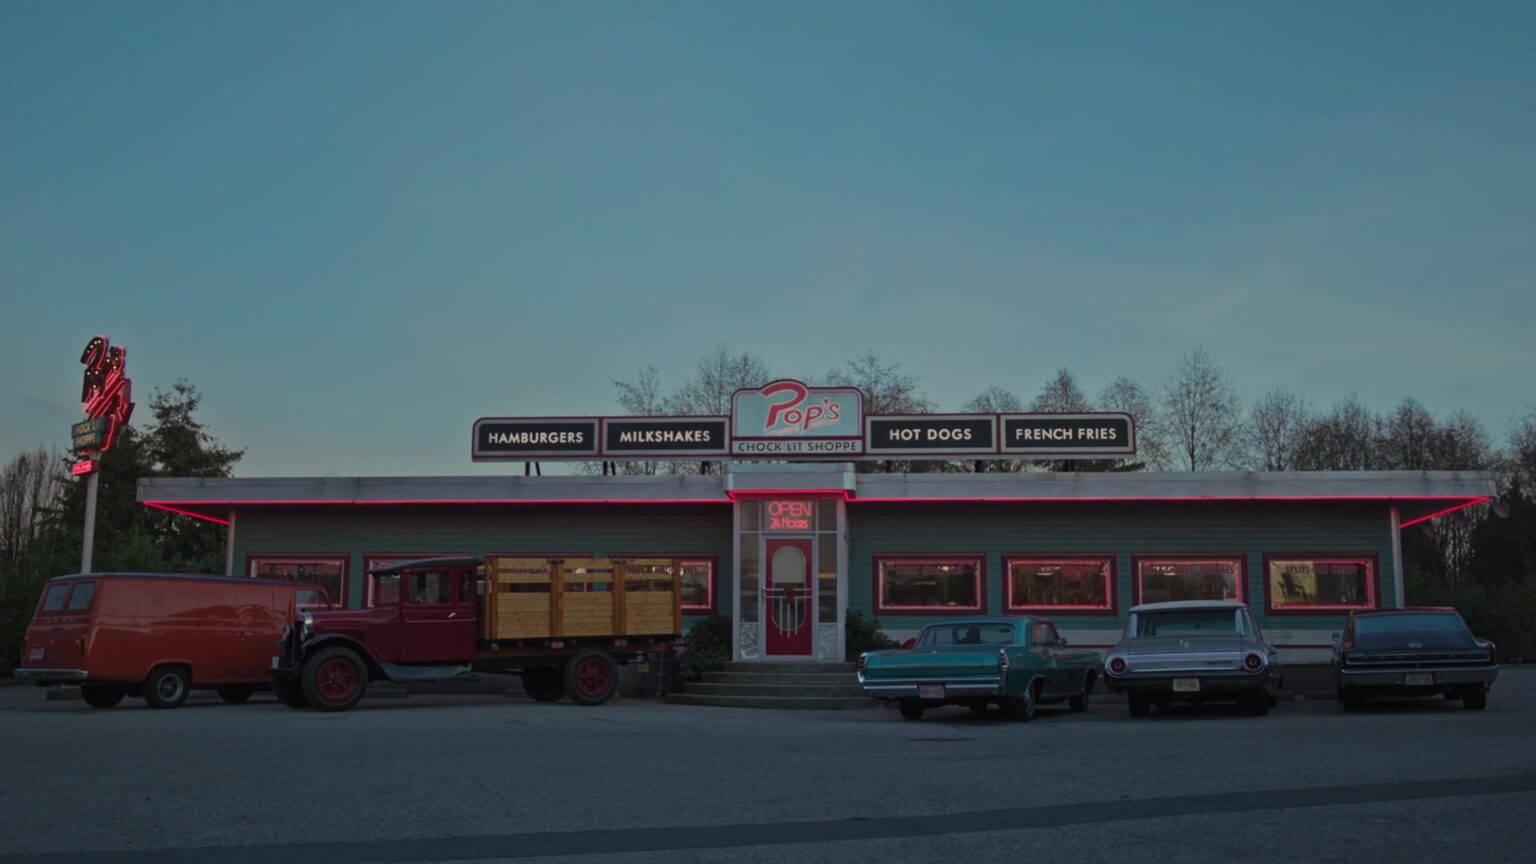 ‘Riverdale’ has teased major changes for season 5. Find out whether Pop’s Chock’lit Shoppe will shut down forever.